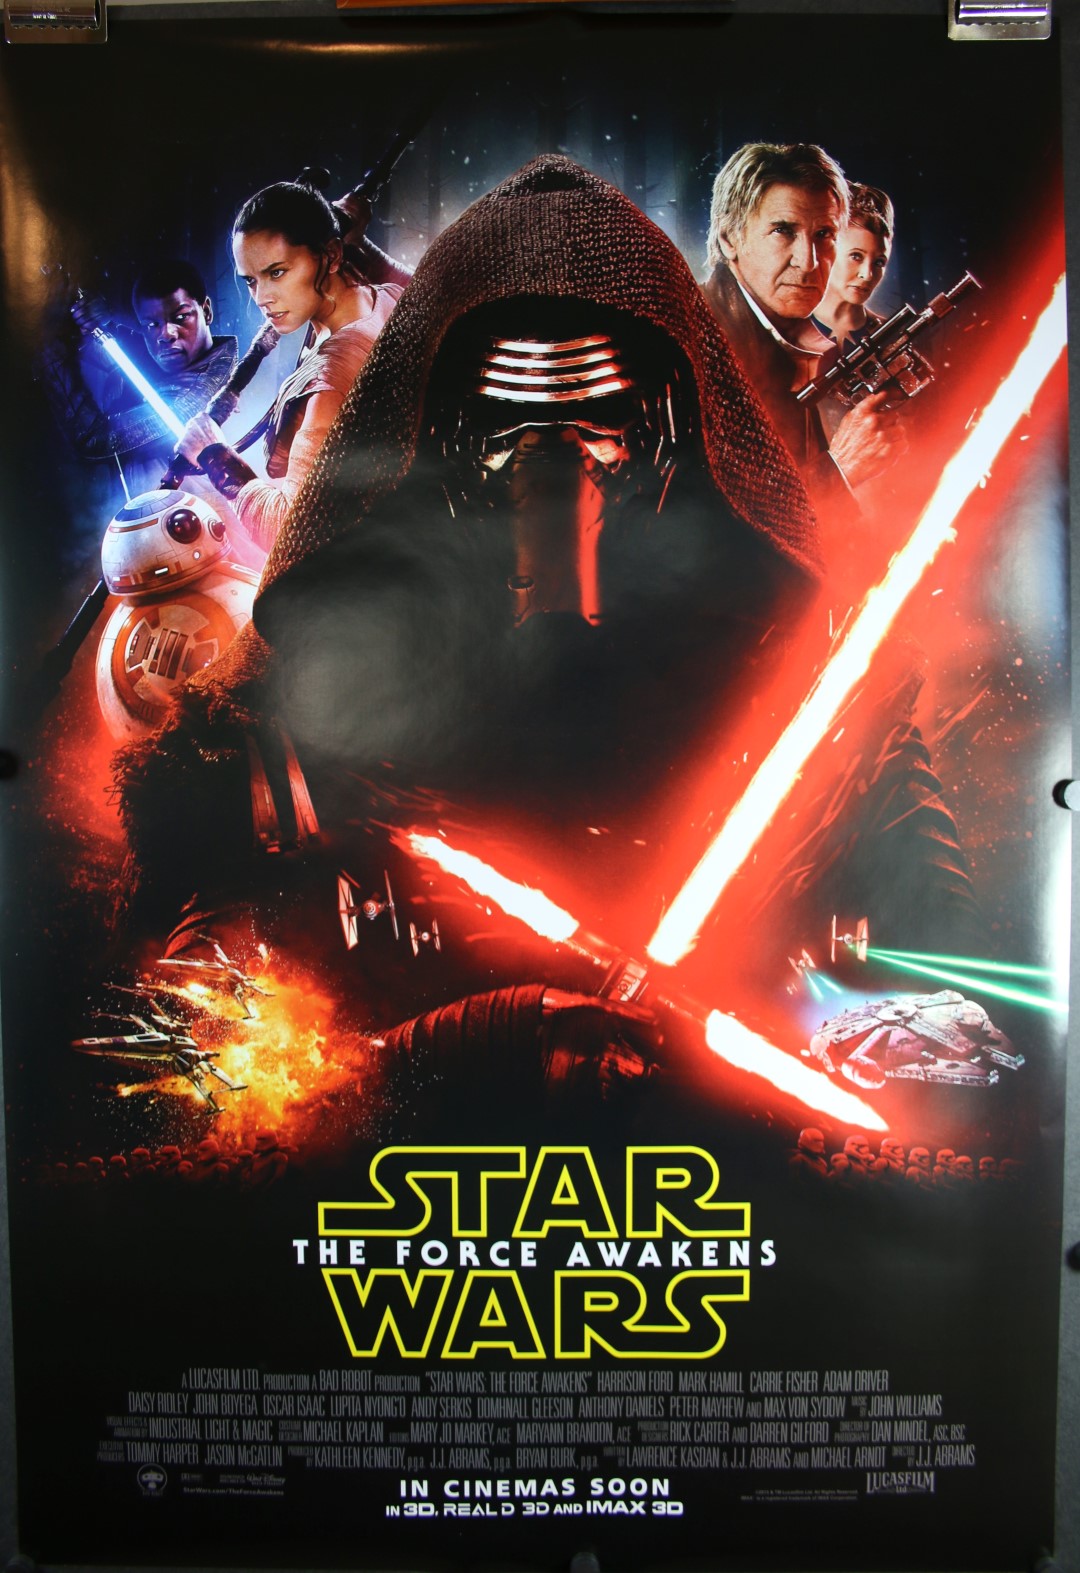 star wars the force awakens movie showings